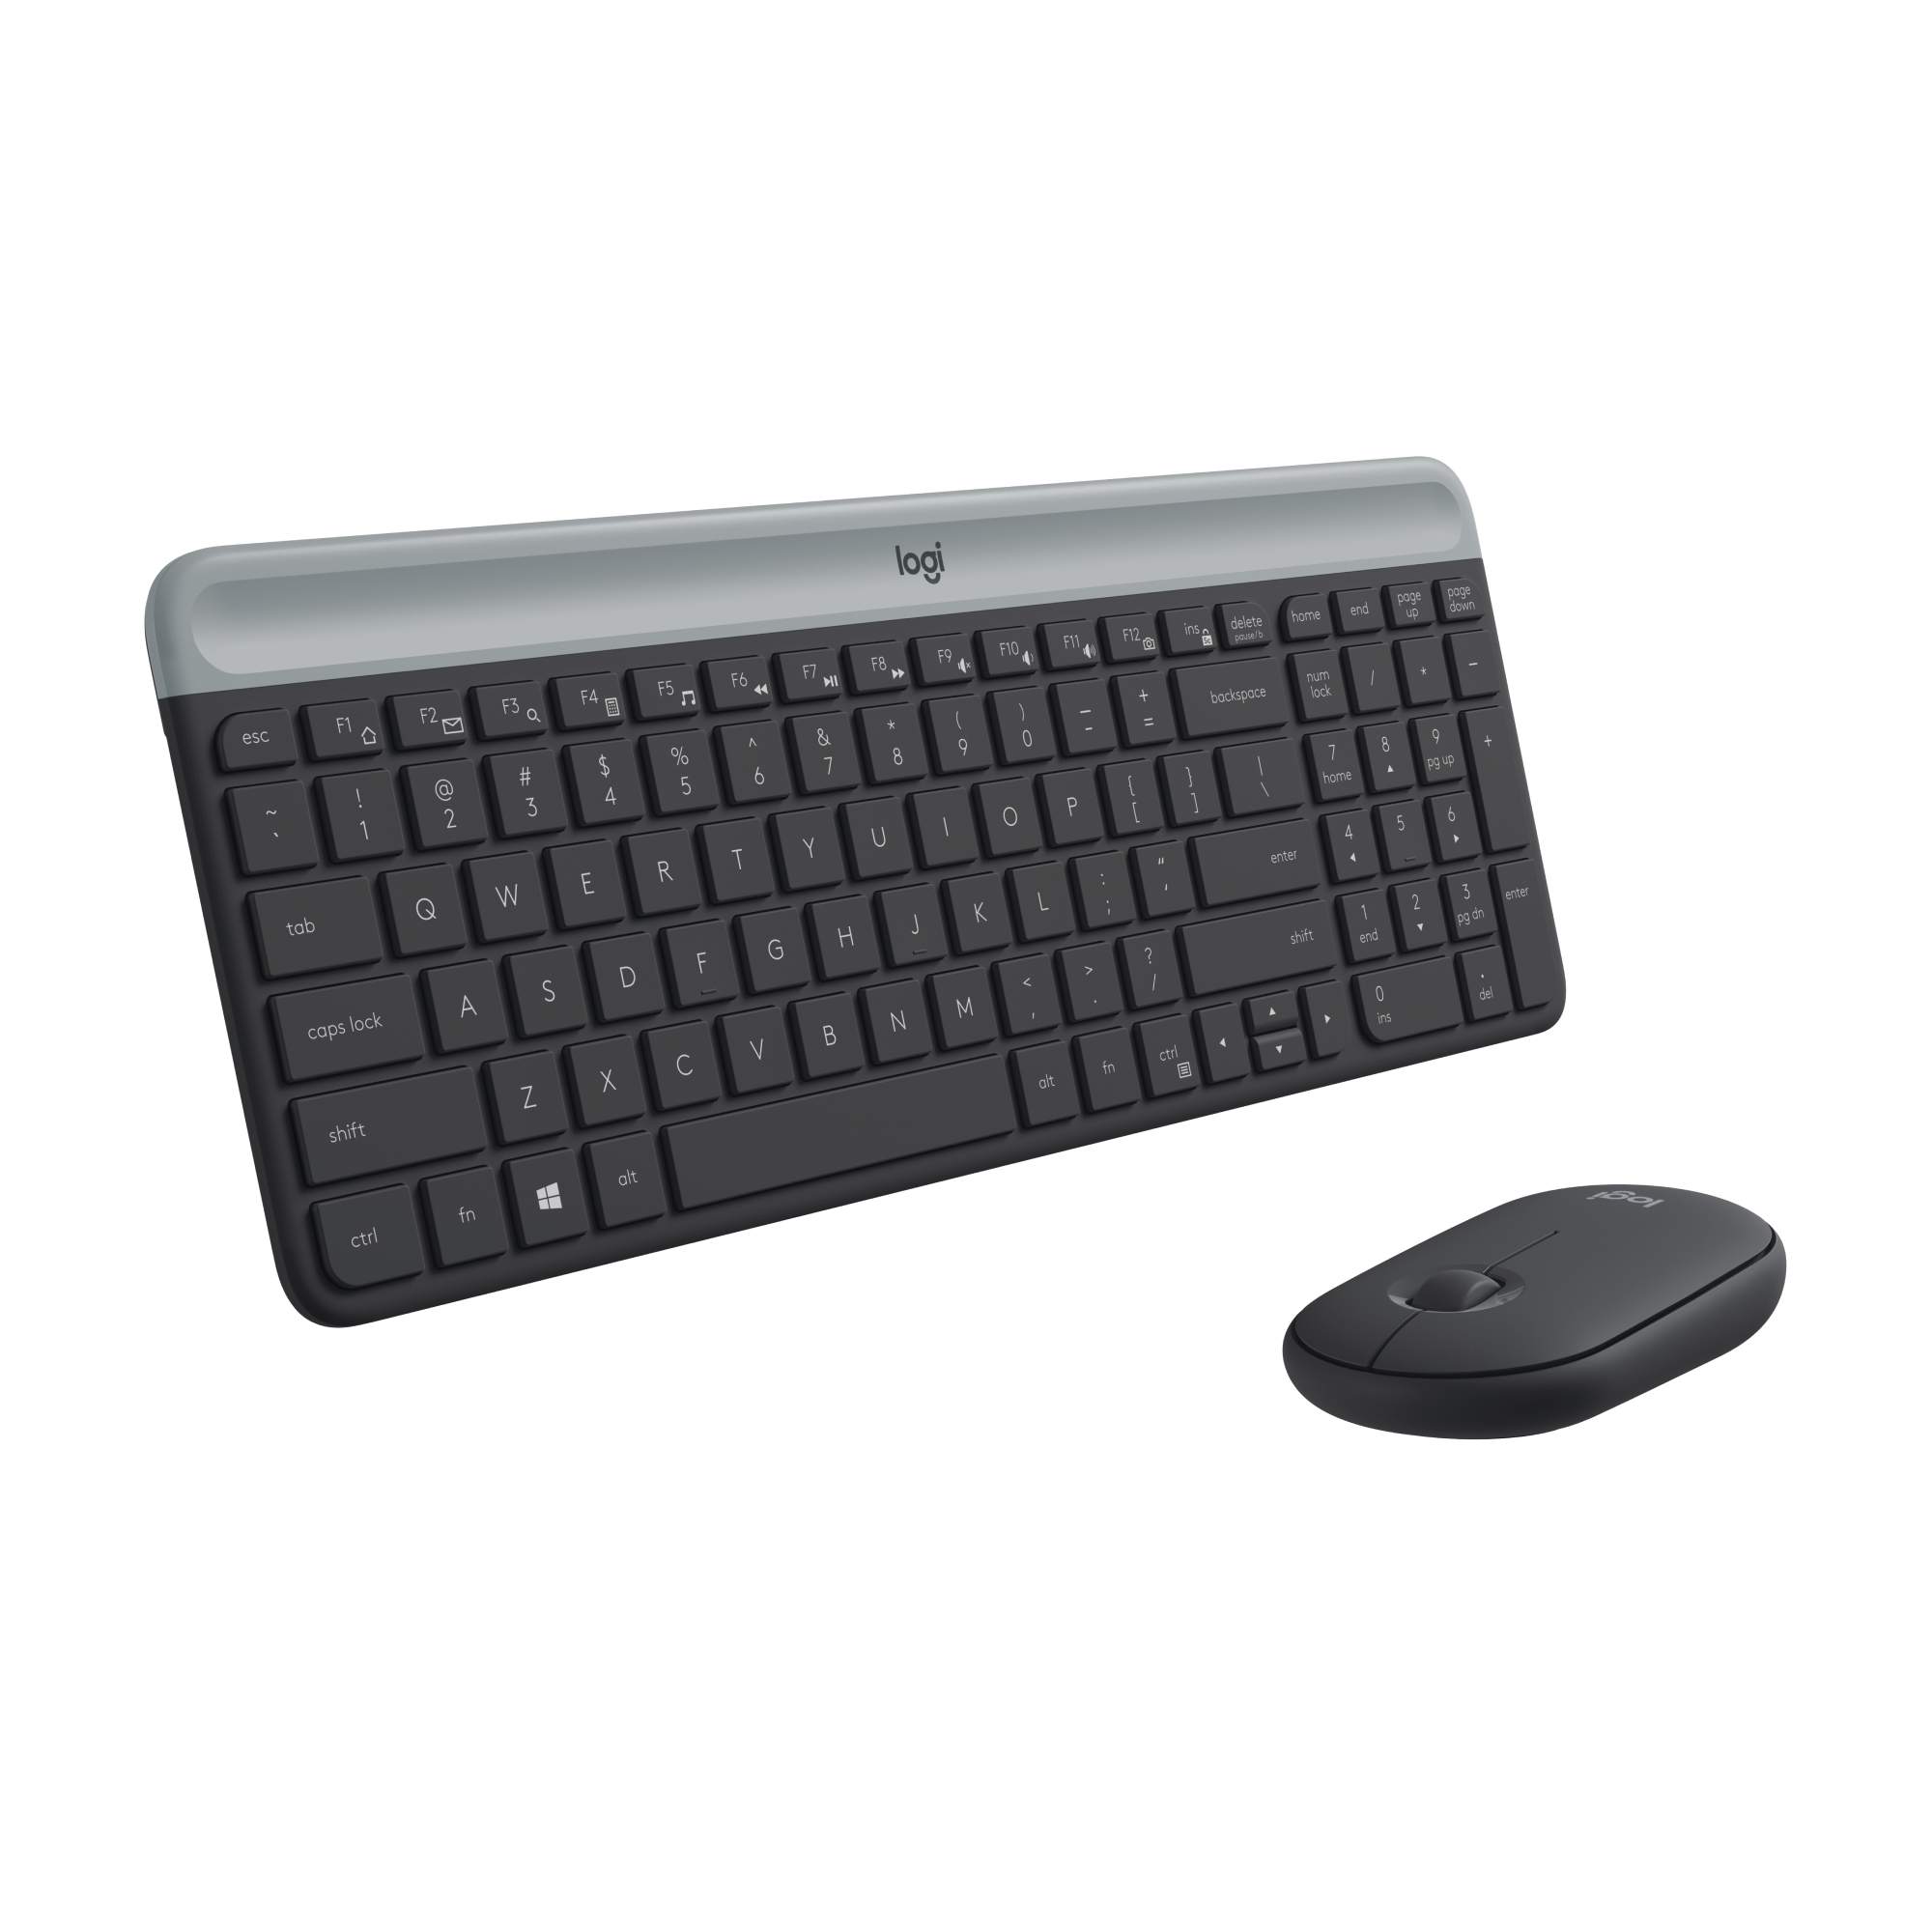 Logitech MK470 Full-size Scissor Keyboard Mouse Bundle with Plug and Play Black/Gray 920-009437 - Best Buy